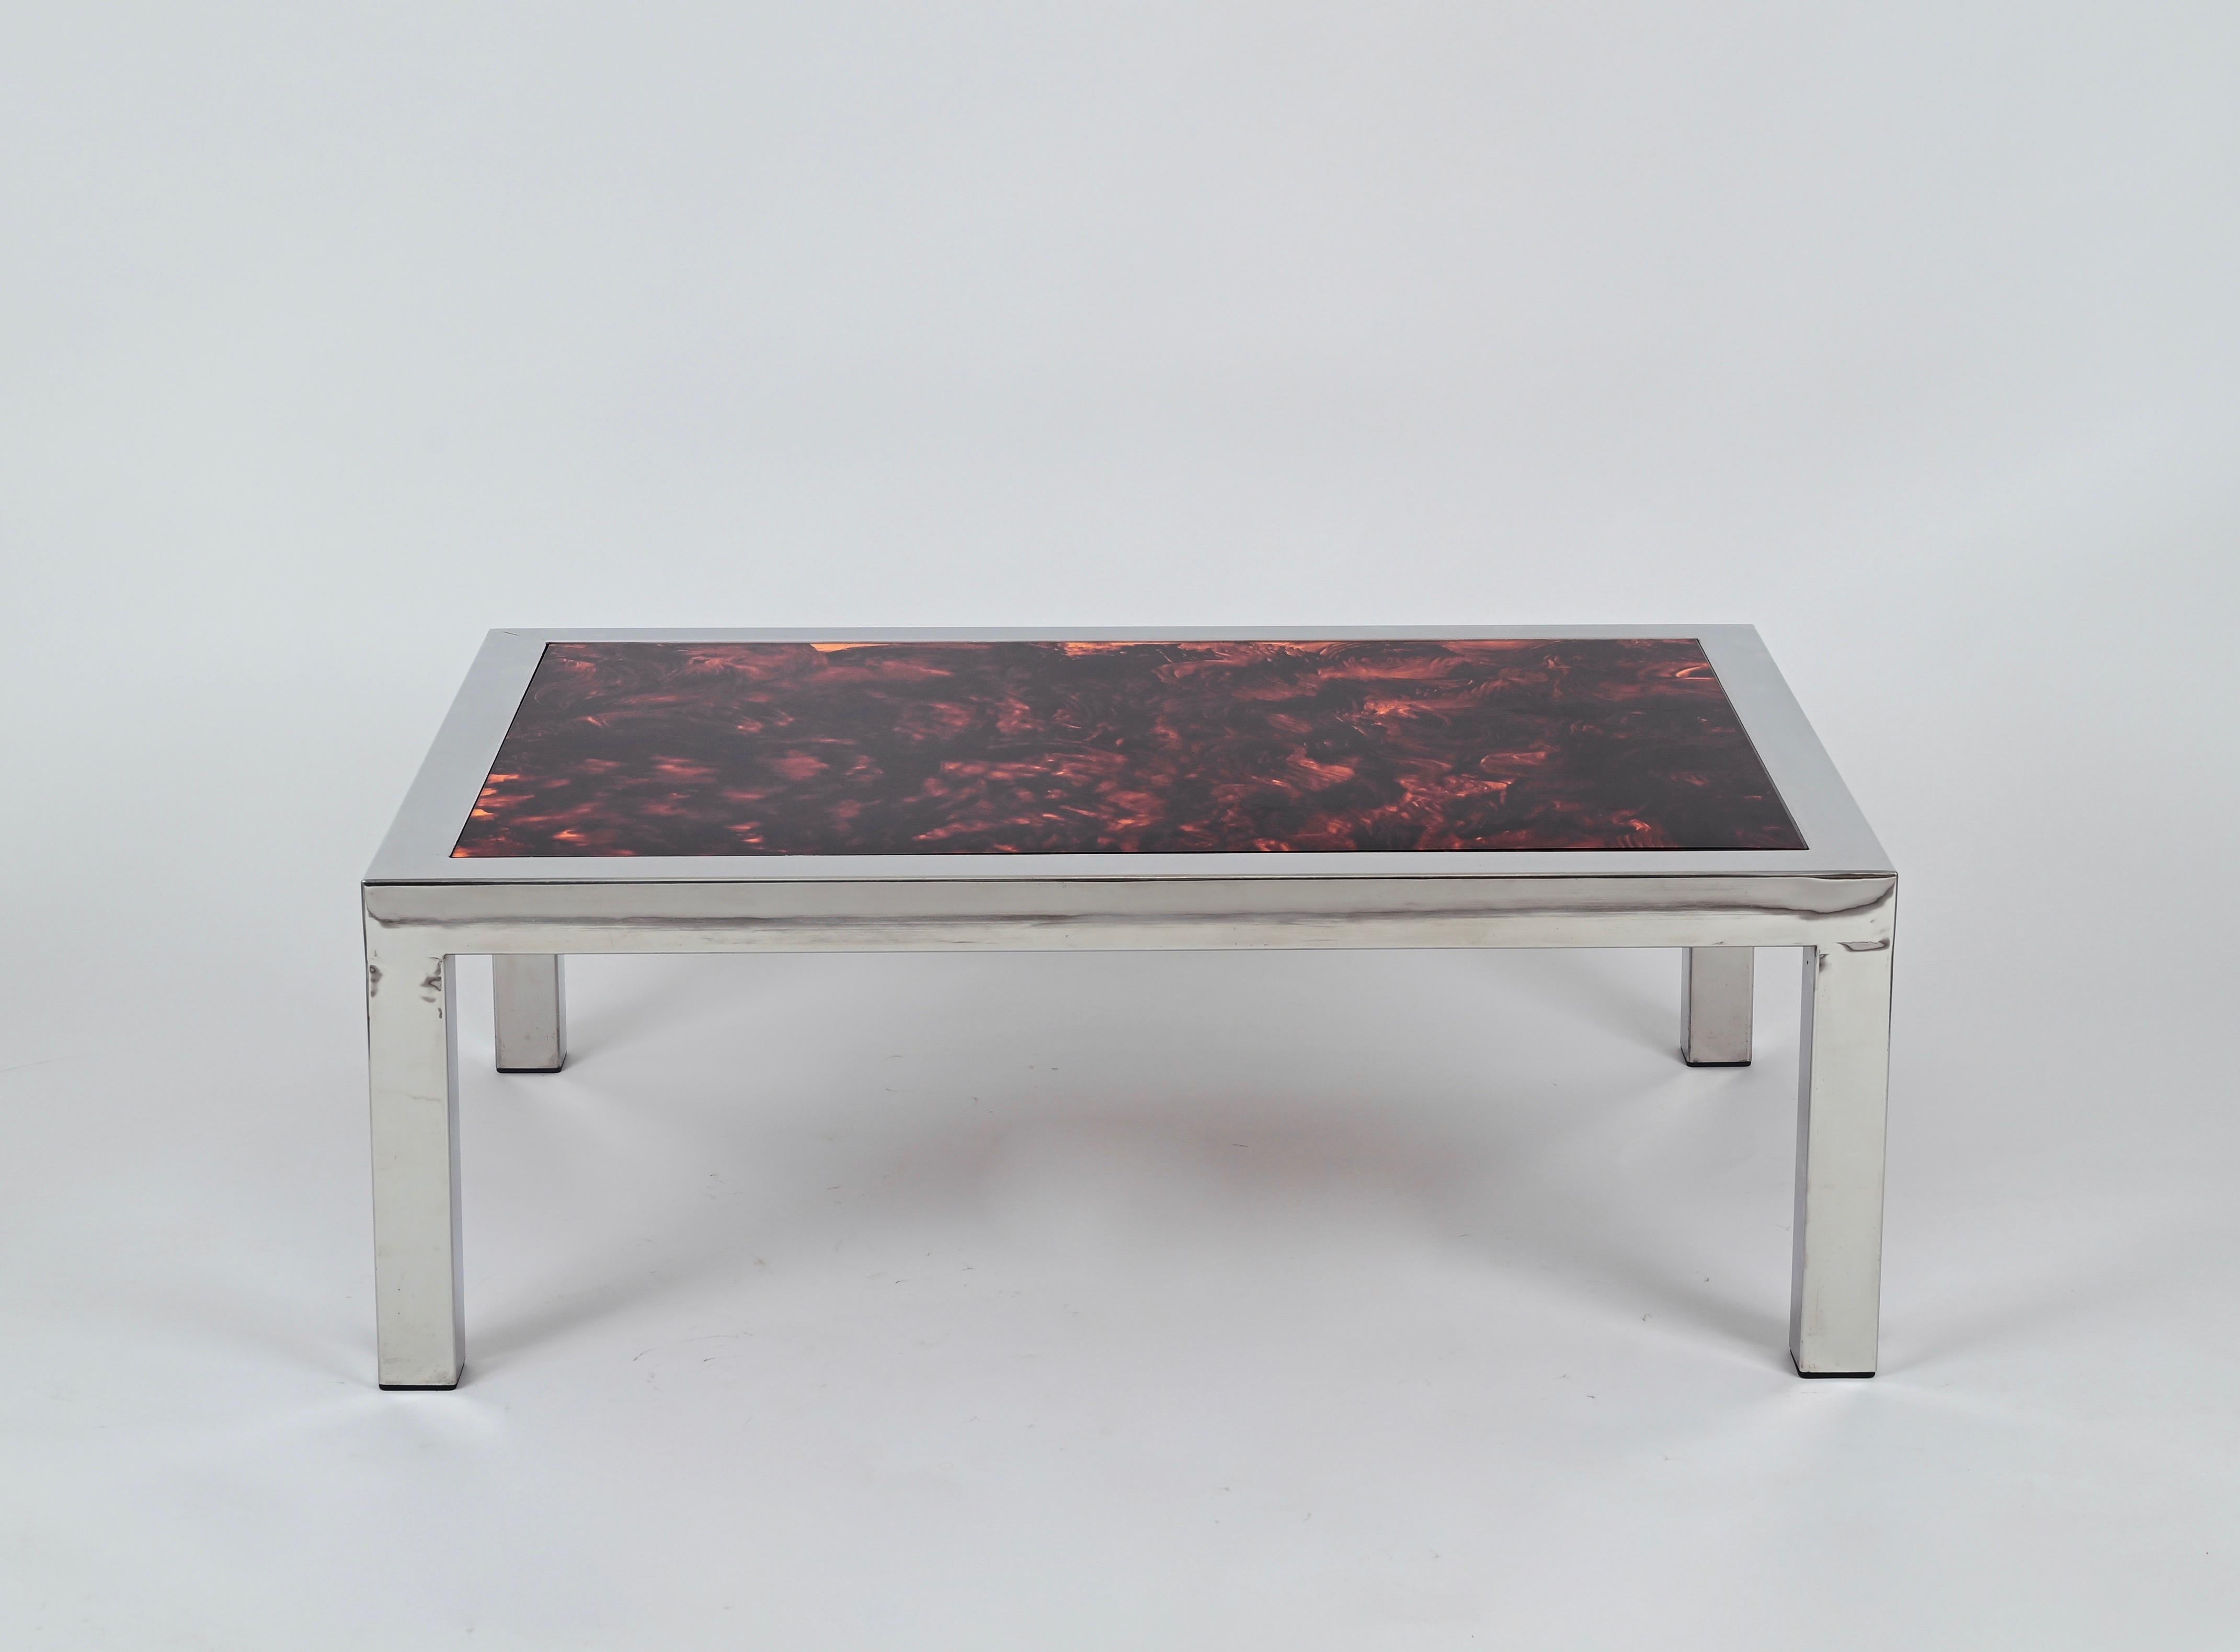 Chromed Steel and Tortoiseshell Effect Lucite Coffee Table, Italy 1970s For Sale 2